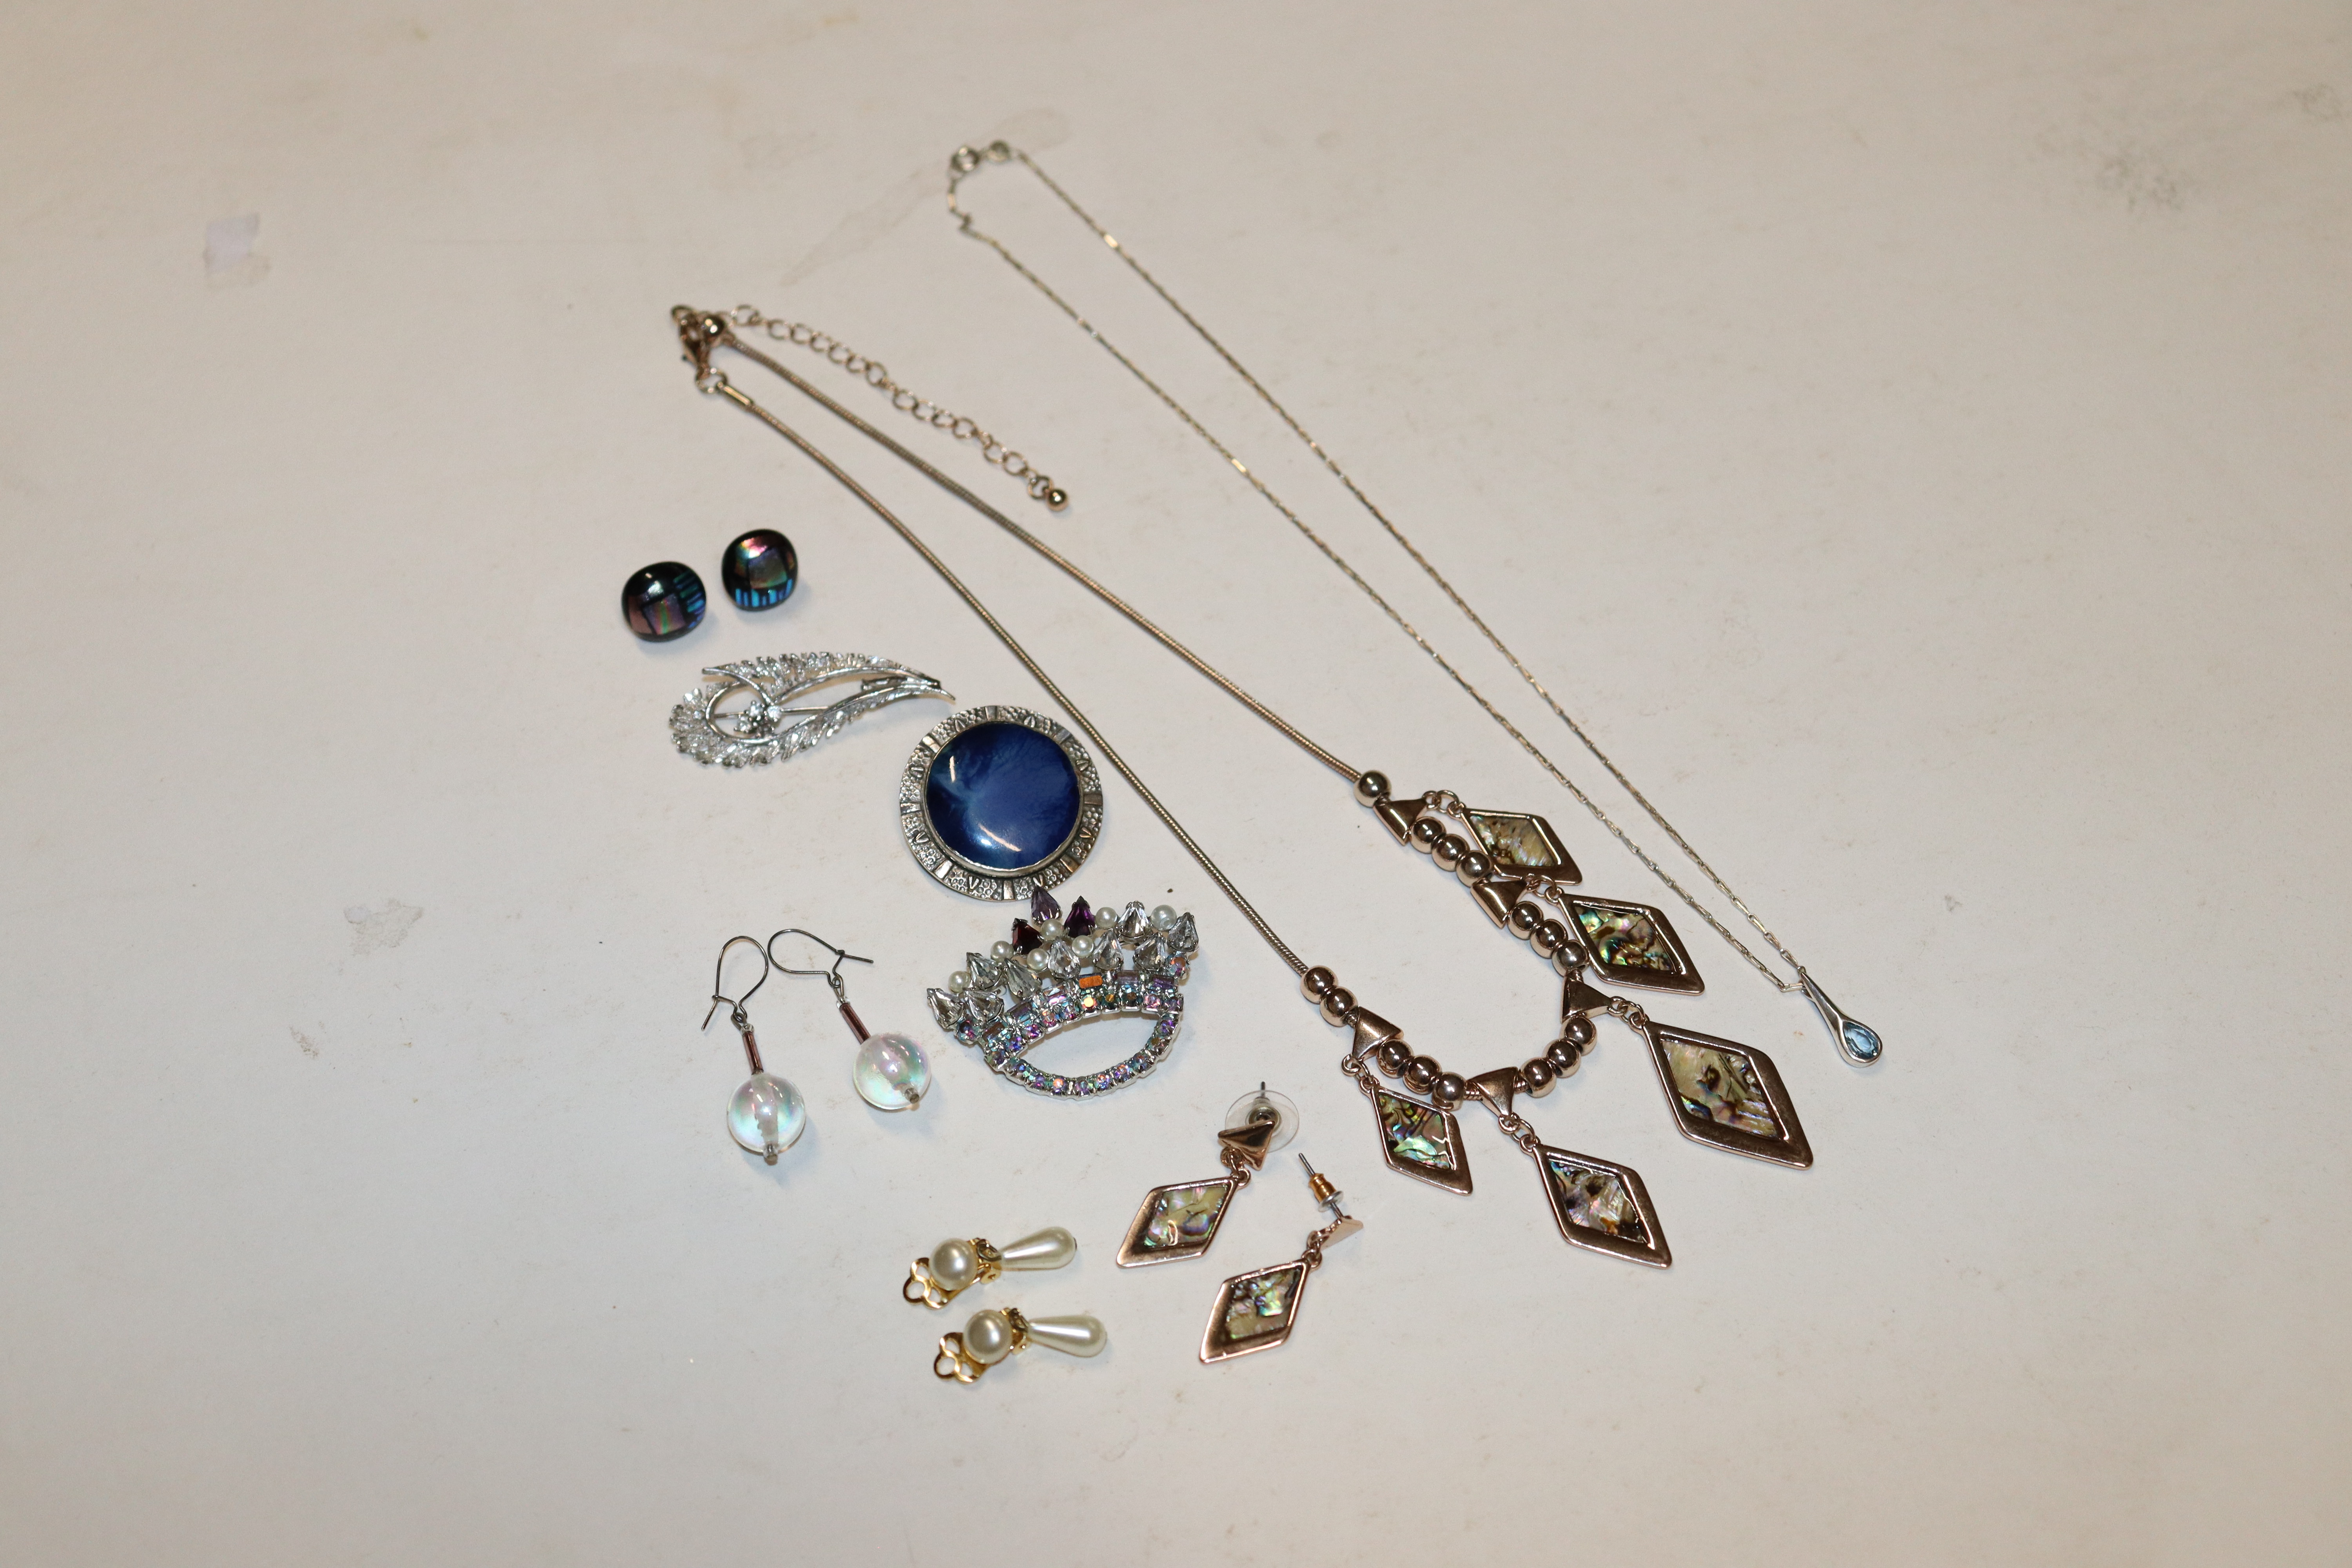 A Ruskin brooch and various costume jewellery